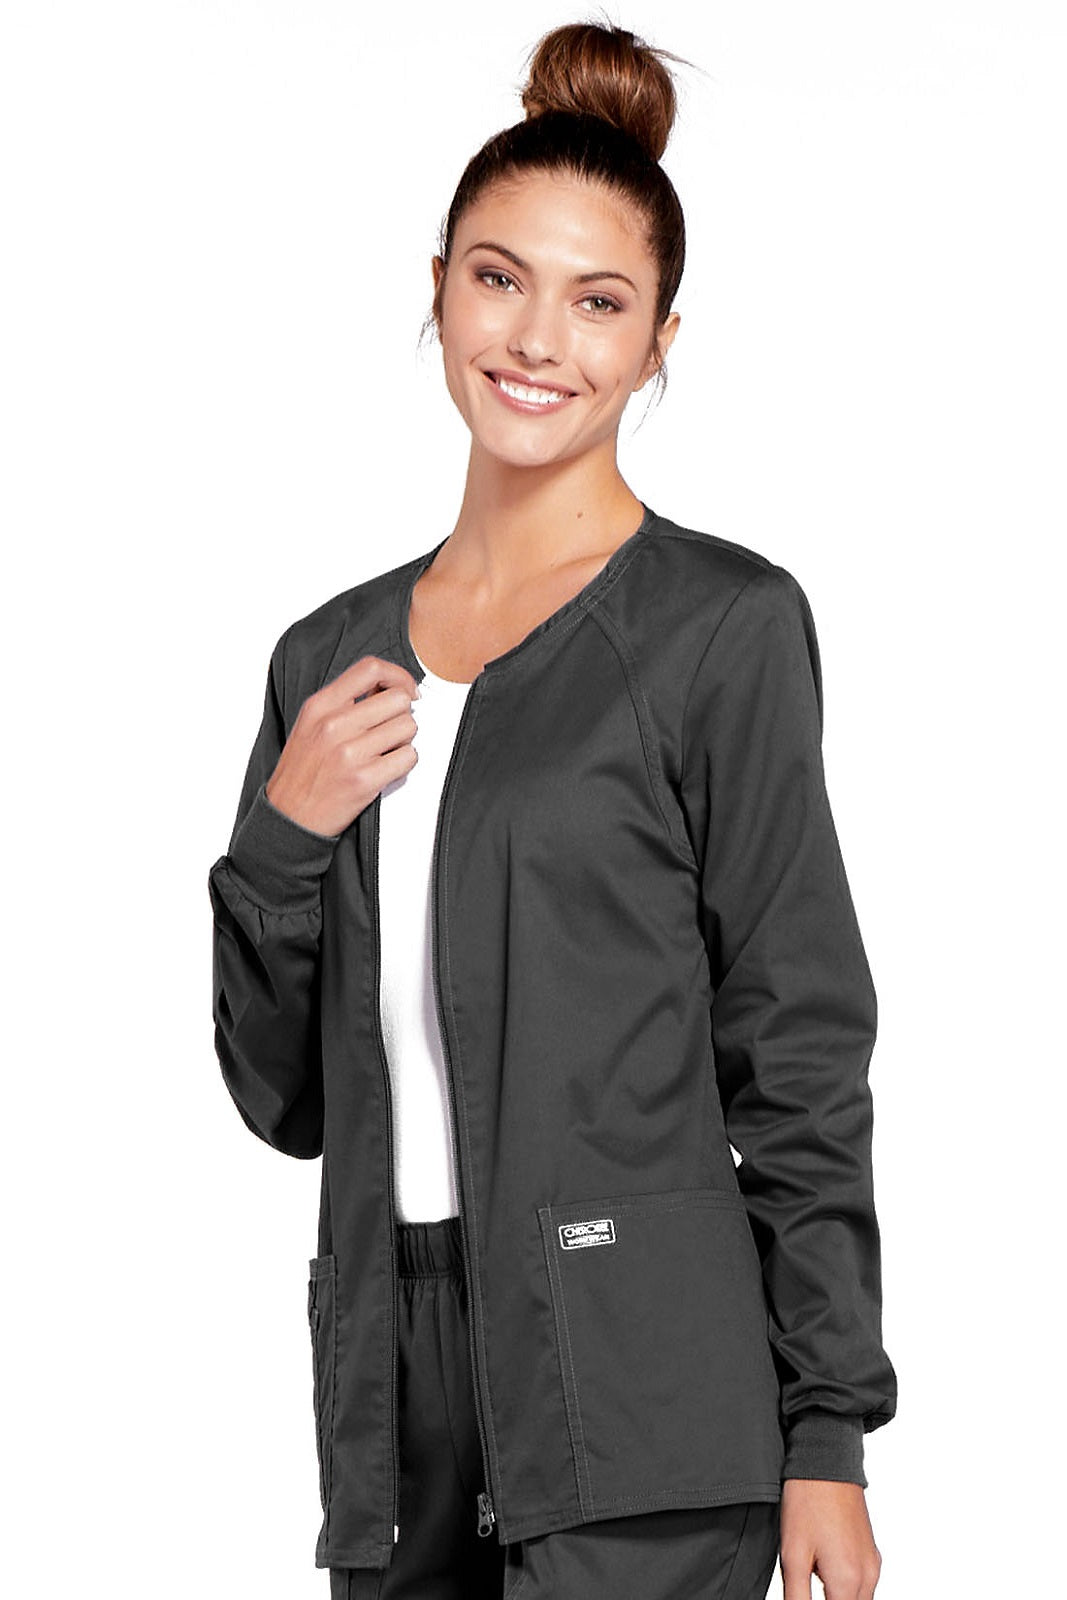 Cherokee Core Stretch Scrub Jacket Zip Front 4315 in Pewter at Parker's Clothing and Shoes.